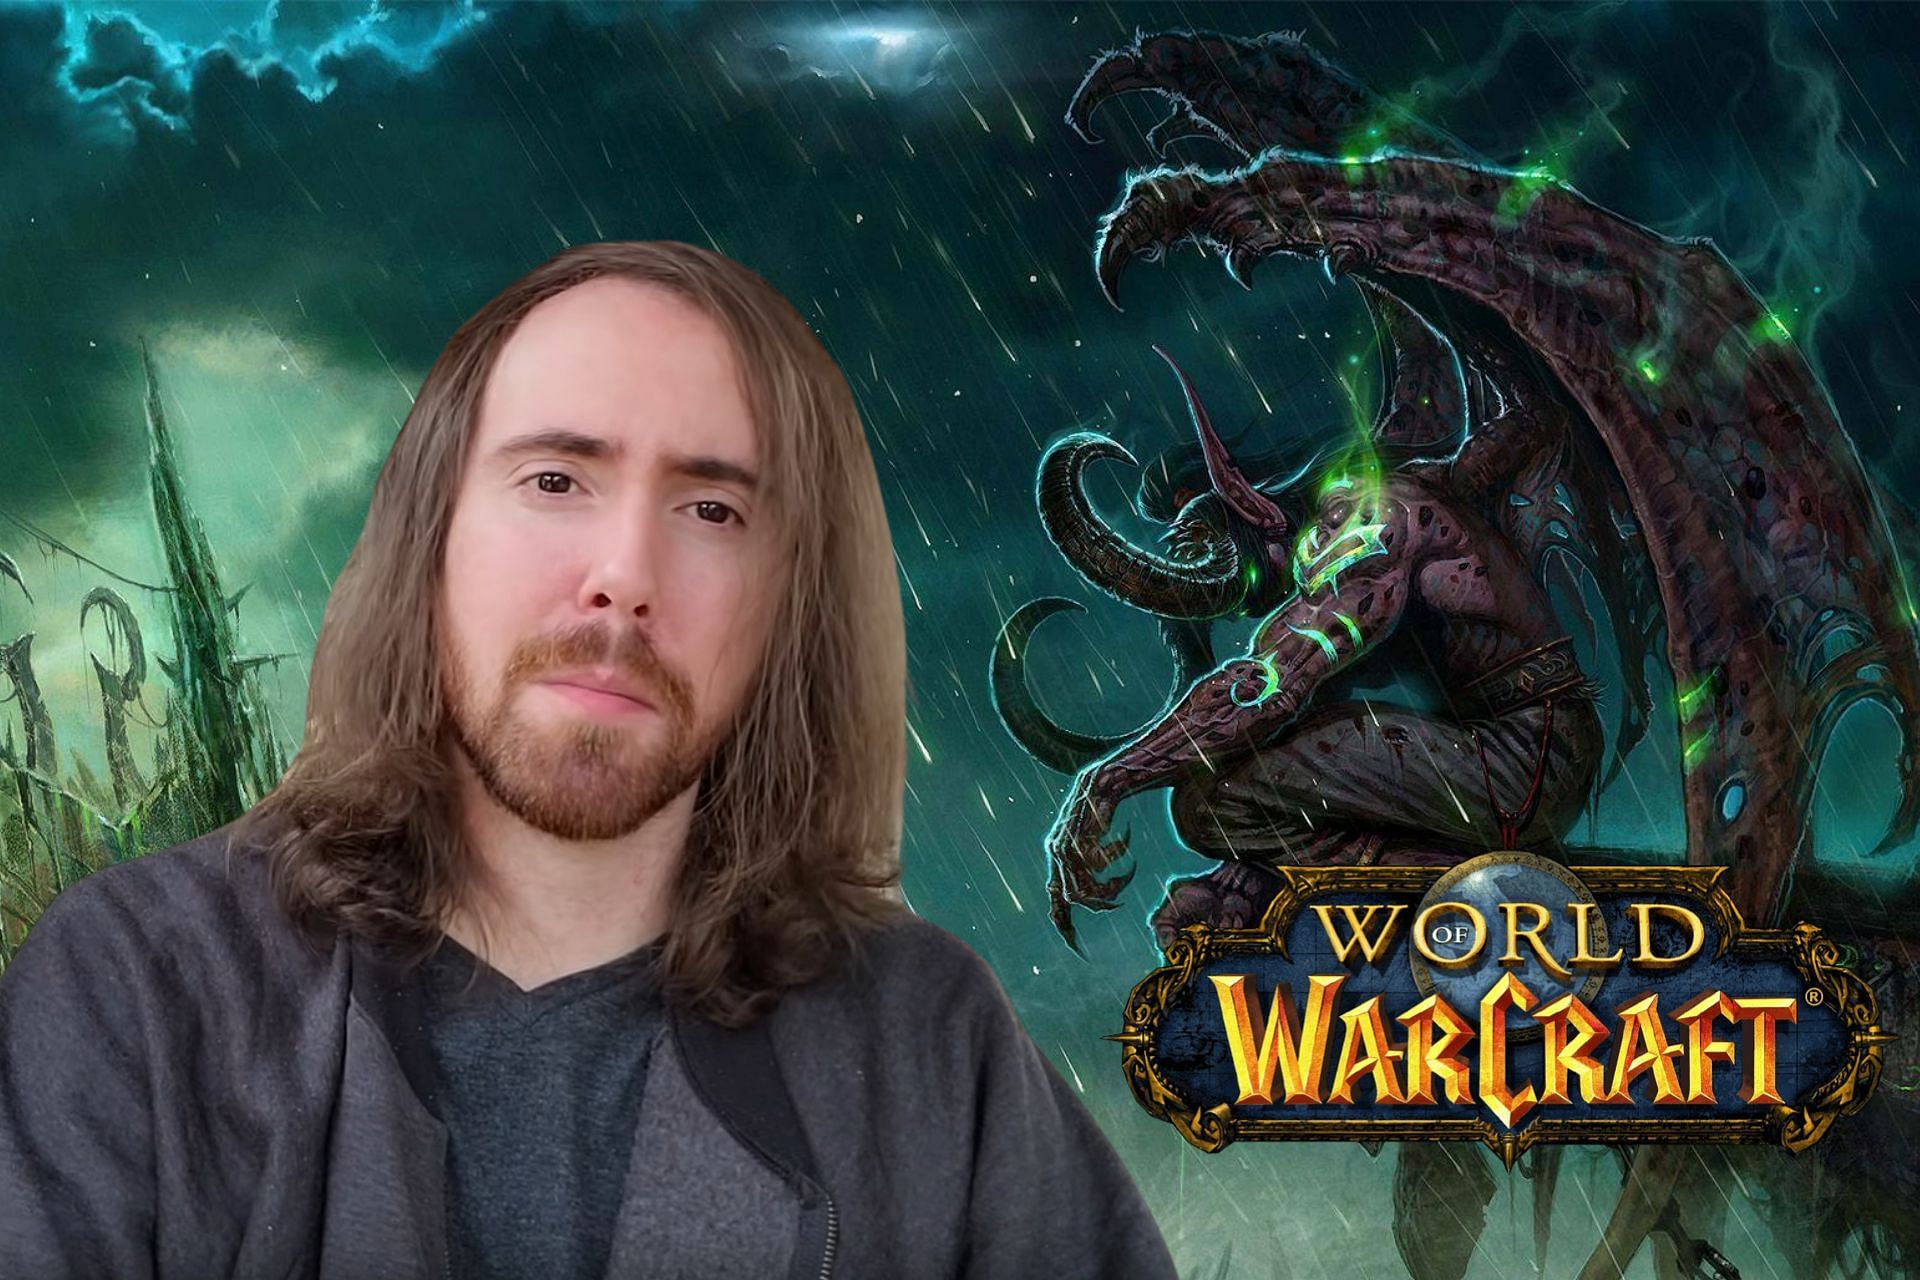 Is Asmongold really coming back to play more World of Warcraft? (Image via Sportskeeda)